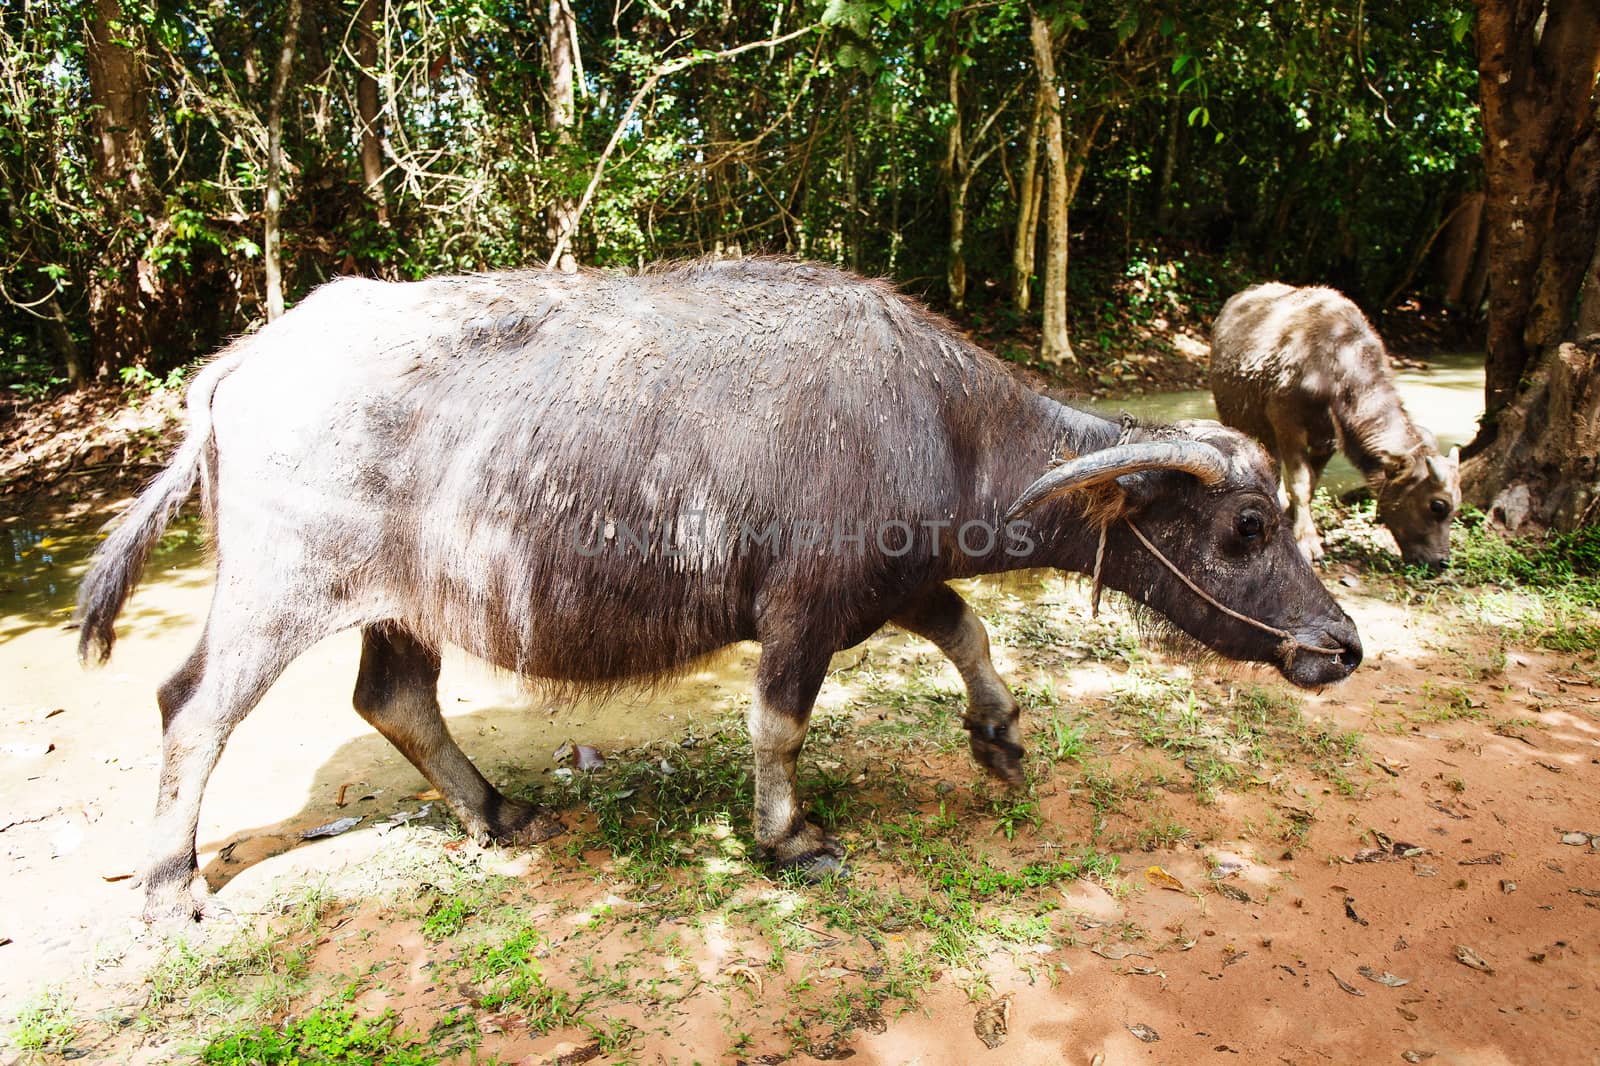 Water buffalo in a forest in asia. Cambodia.